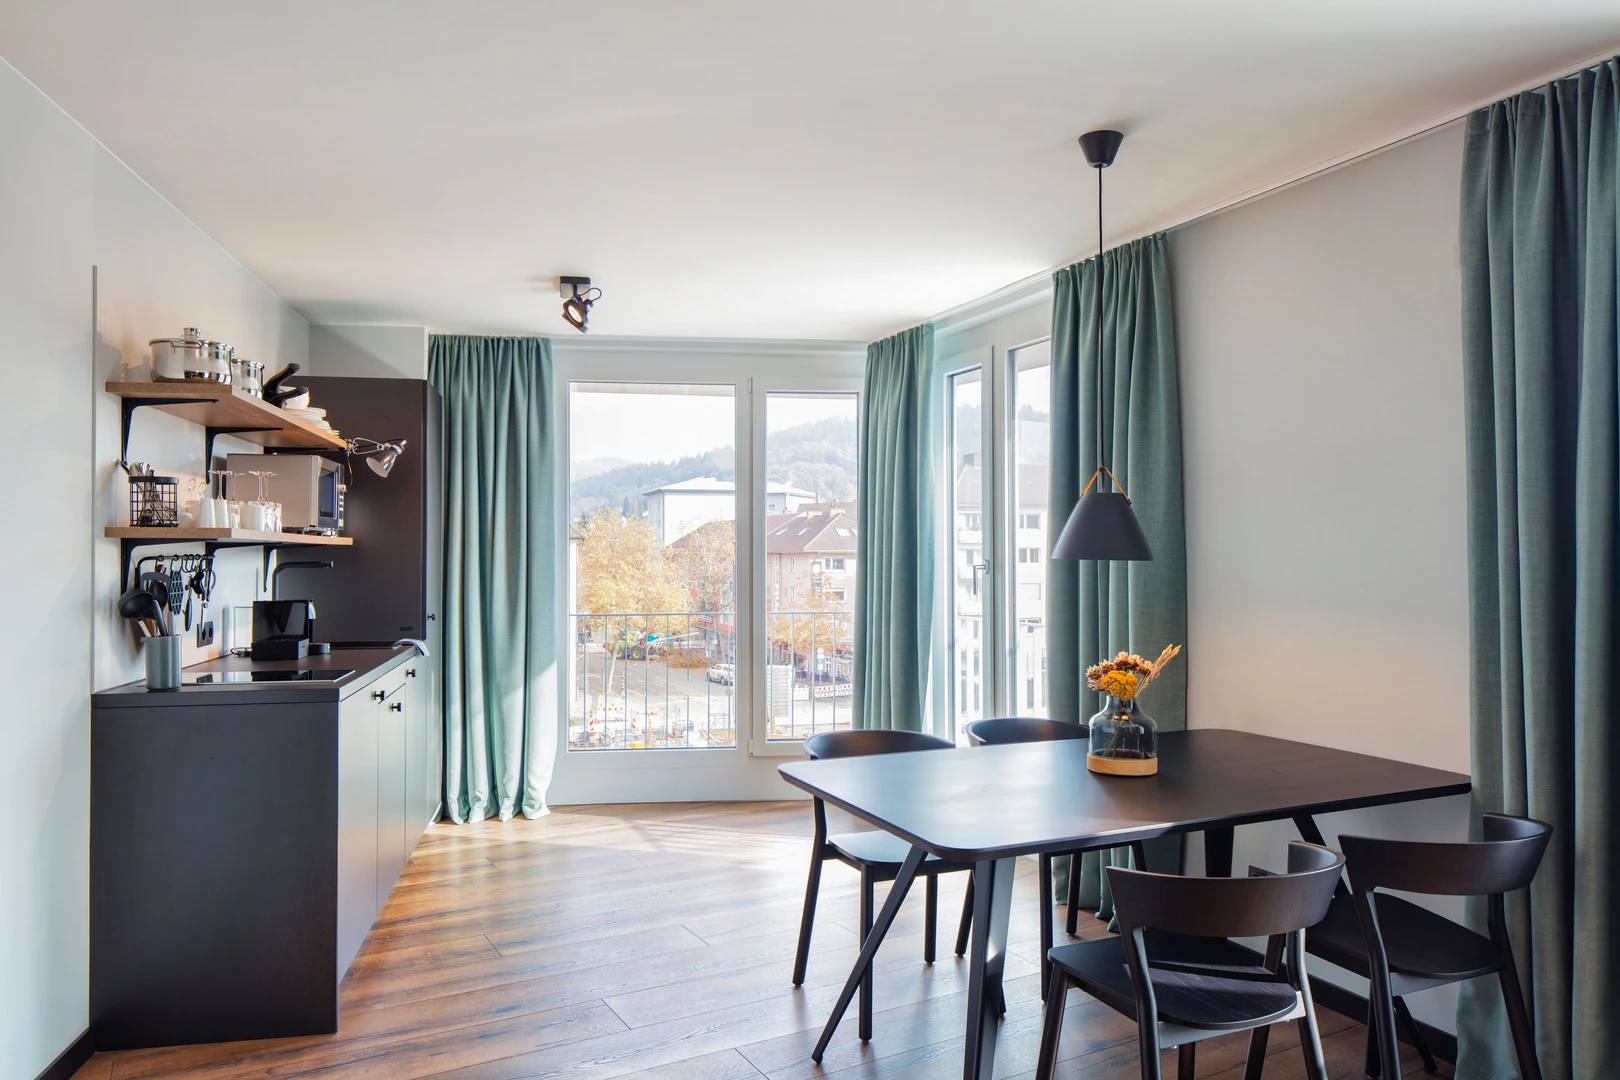 Renting rooms by the month in Freiburg Im Breisgau